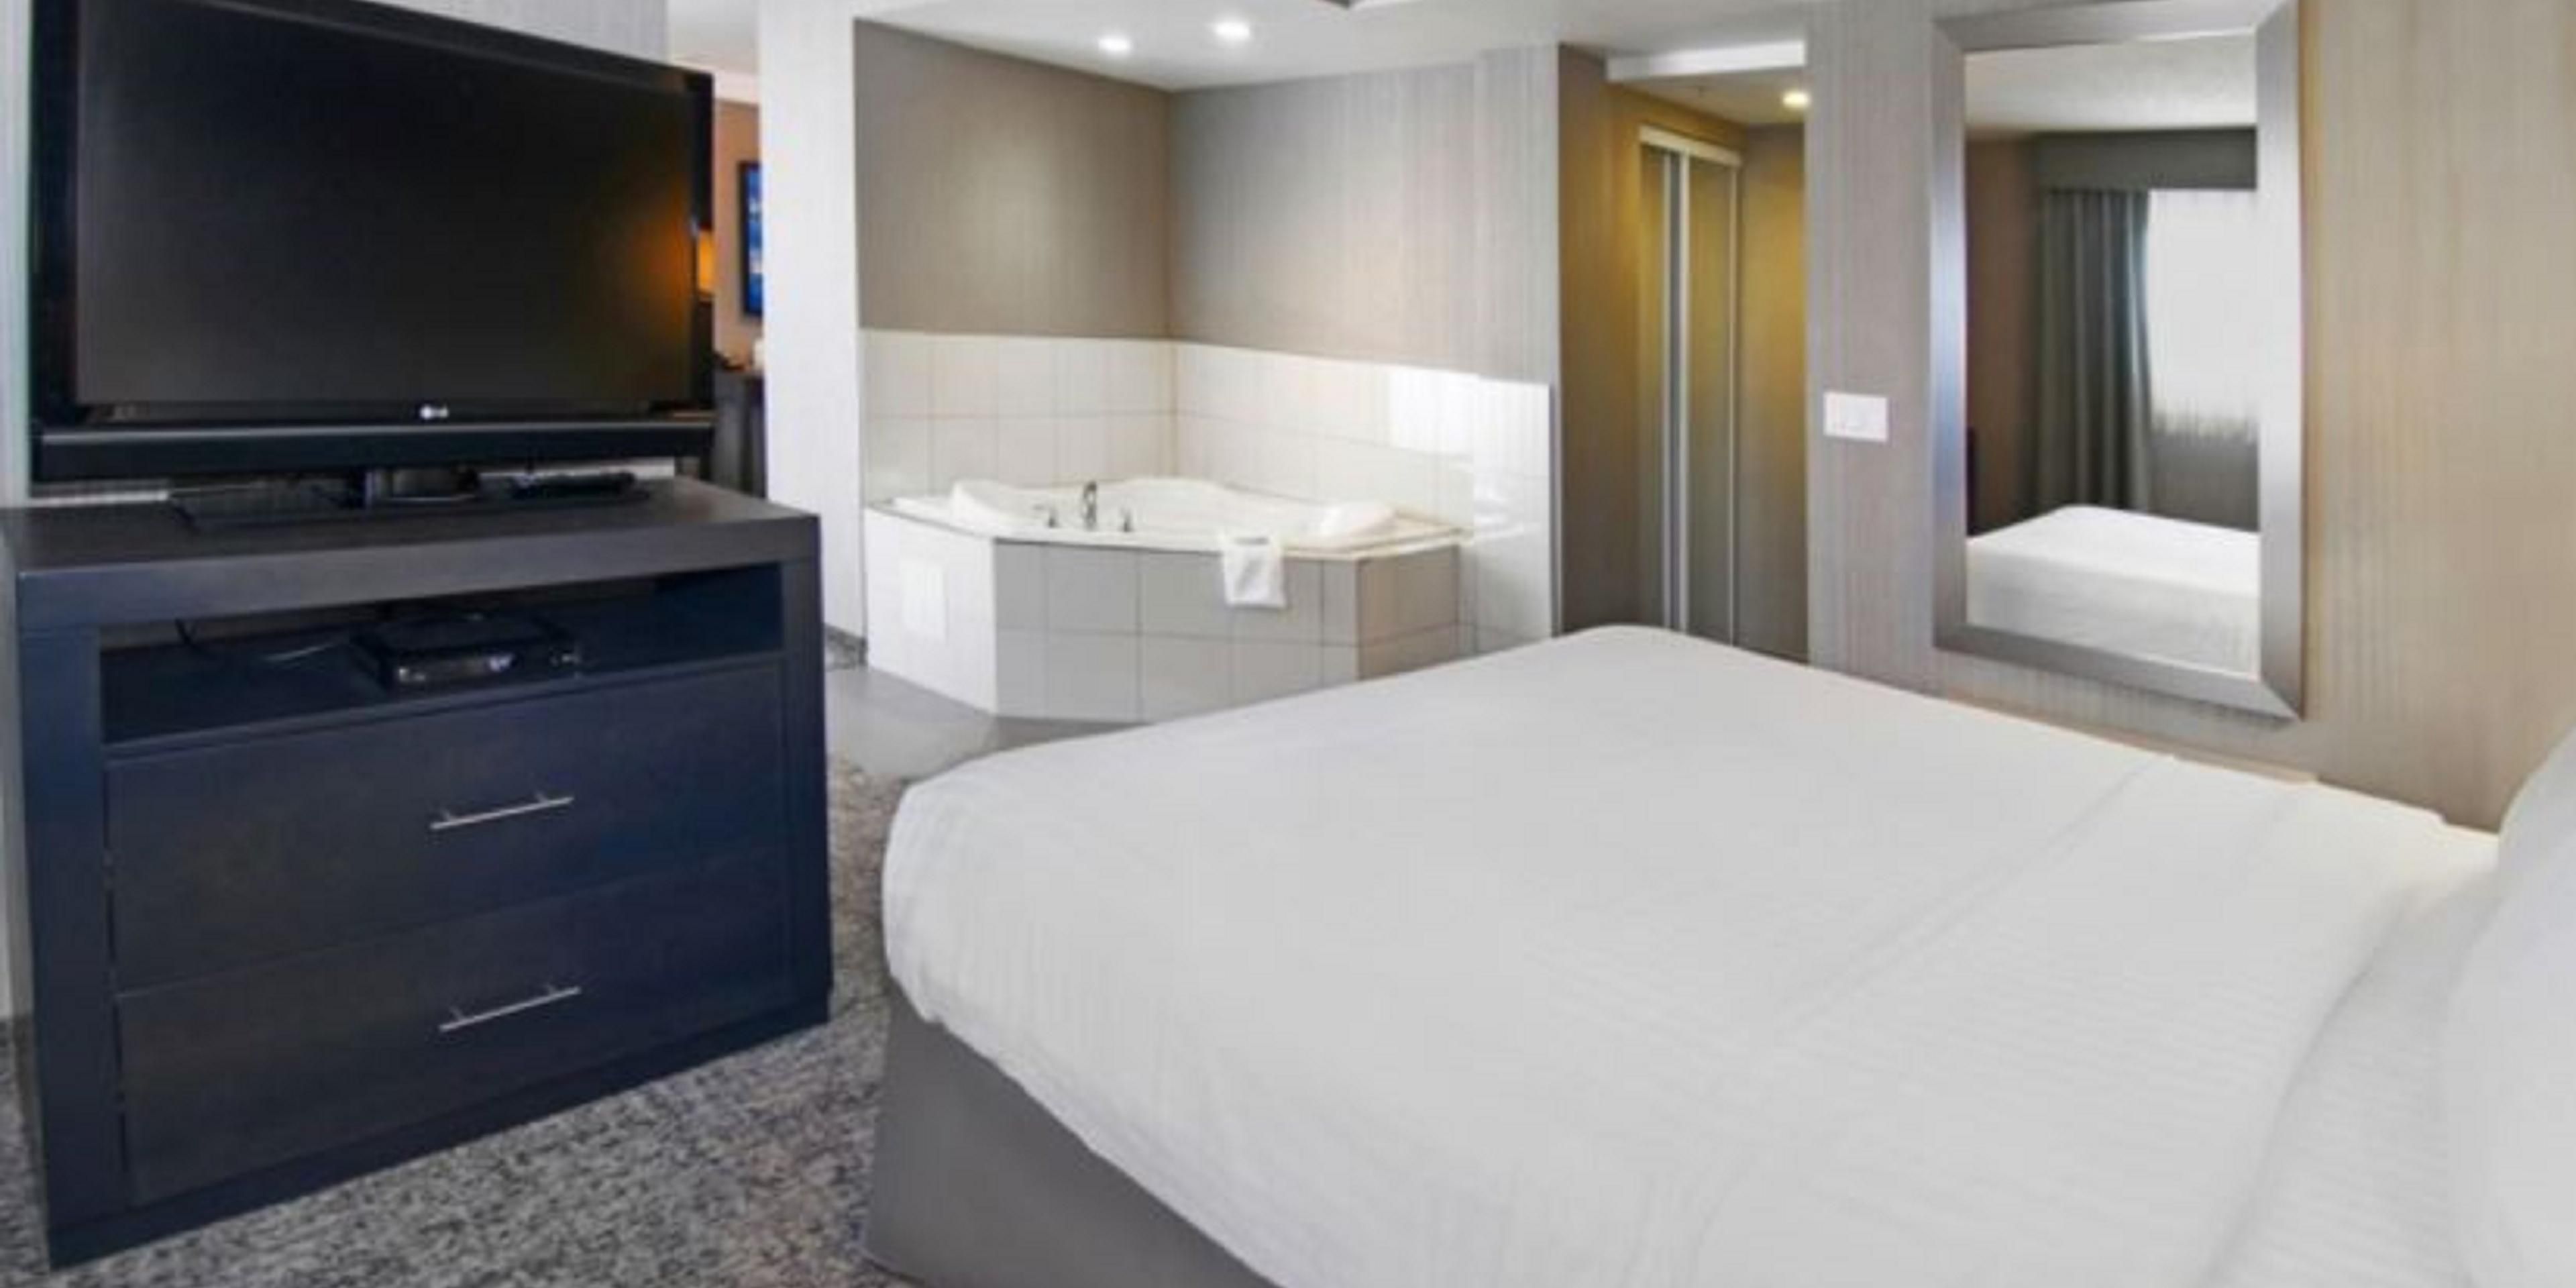 Spoil yourself on your next stay by reserving one our Whirlpool Suites.  This room features an in-room jetted tub, king bed and private balcony. Time to recharge and relax.